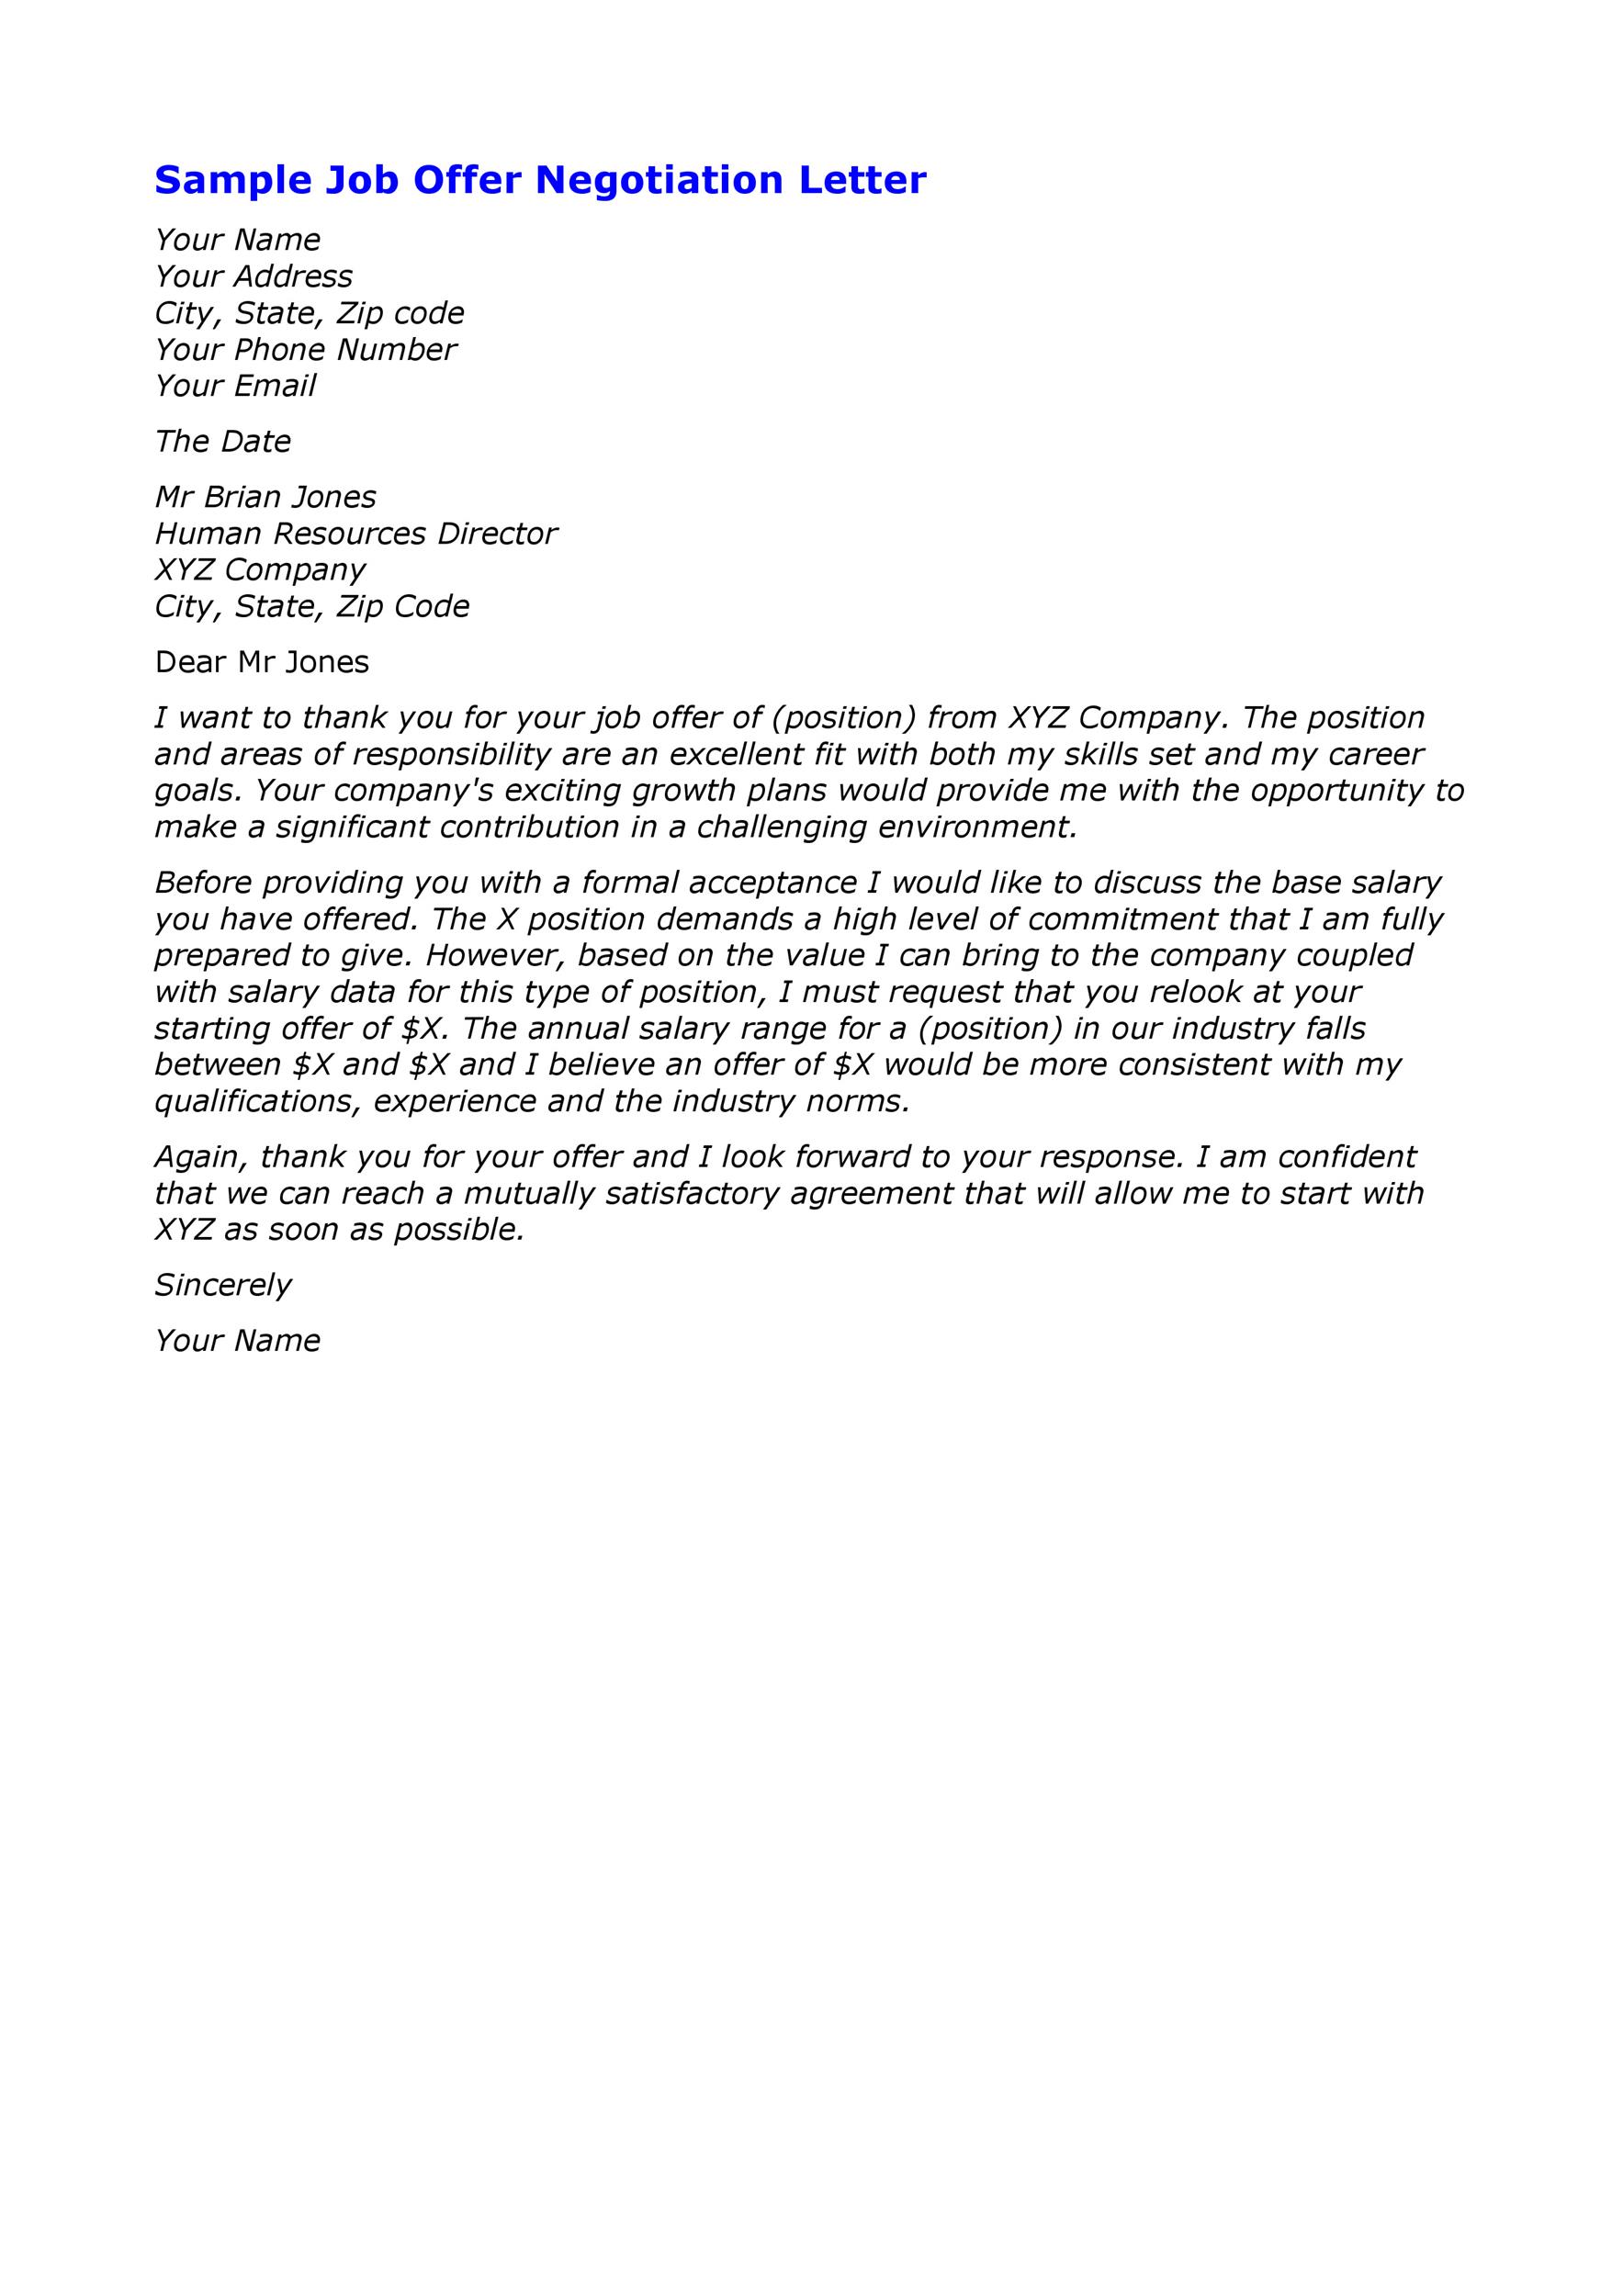 Price Negotiation Reply Letter Sample from templatelab.com